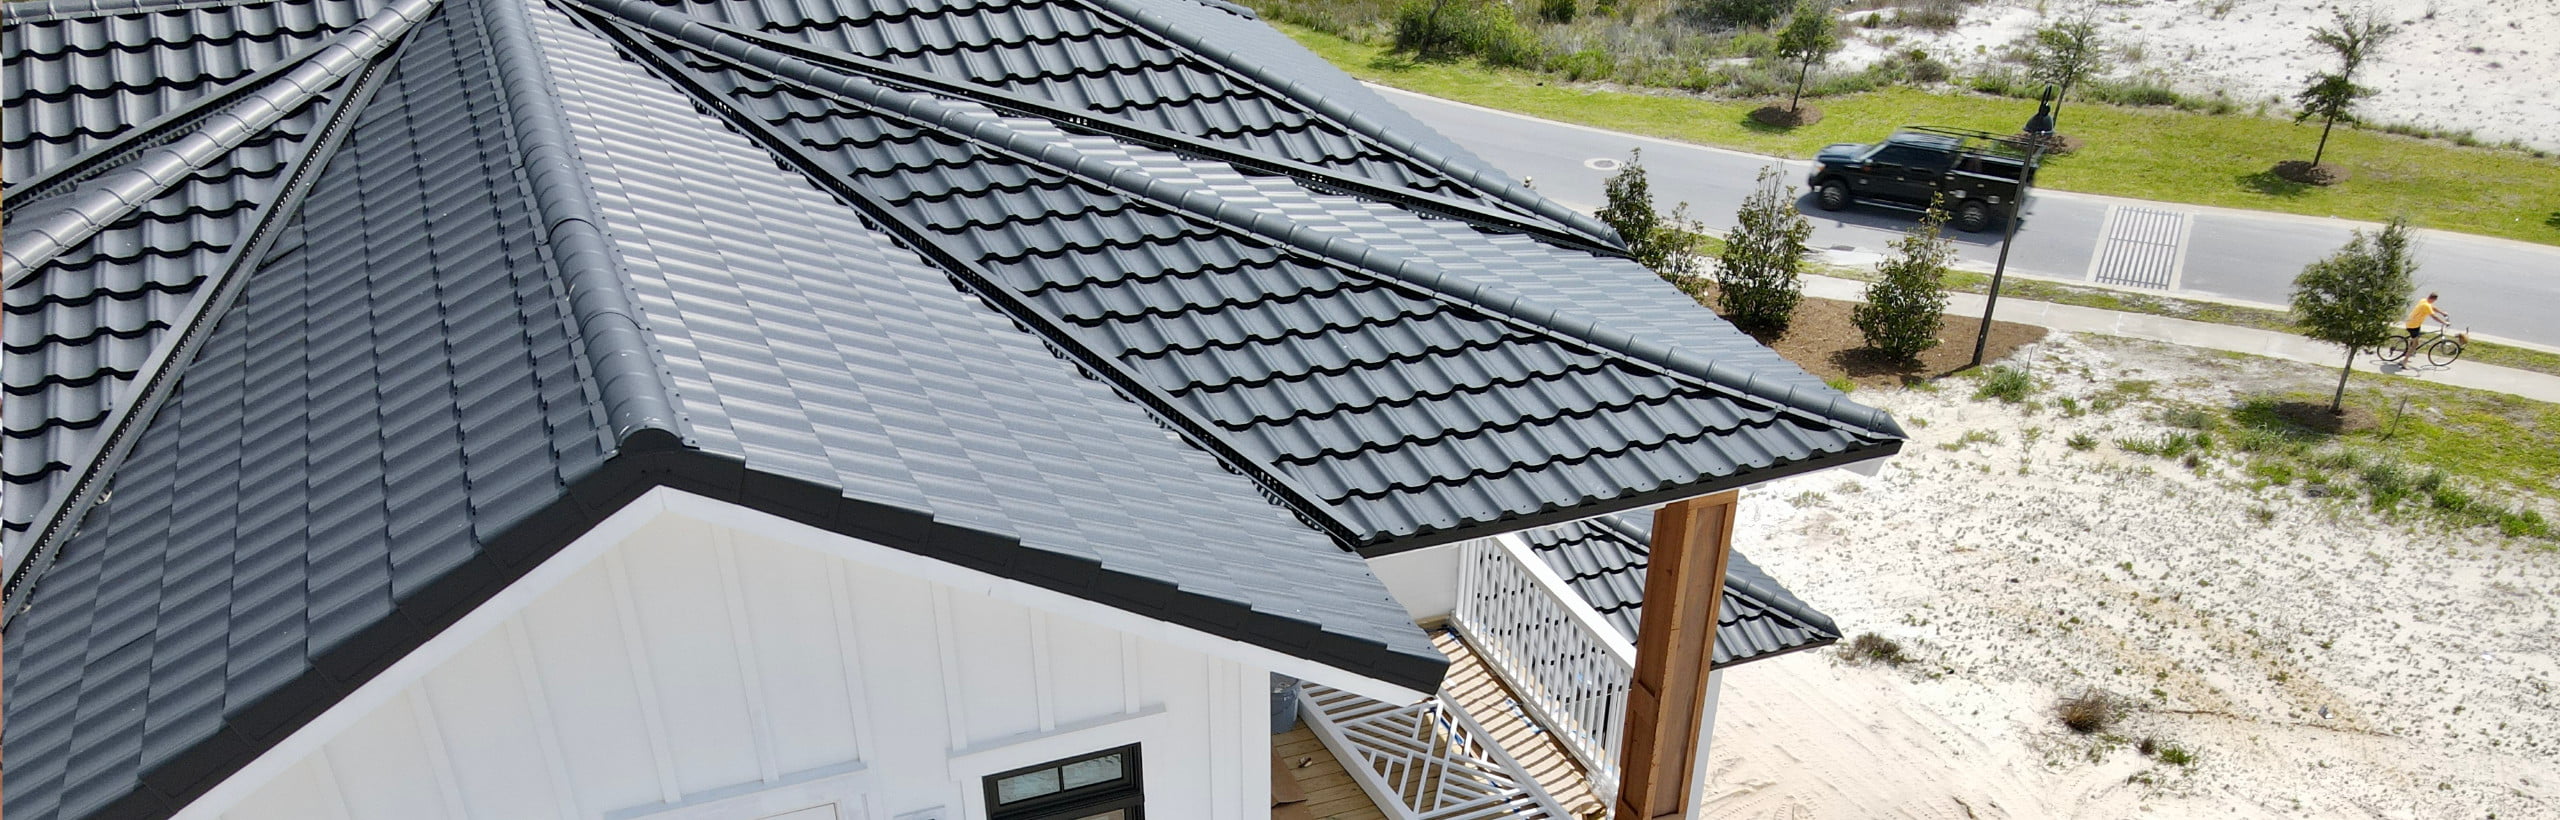 Hall Roofing - Roofing services for Cape San Blas, Mexico Beach, Port St. Joe, Apalachicola, Eastpoint, and St. George Island